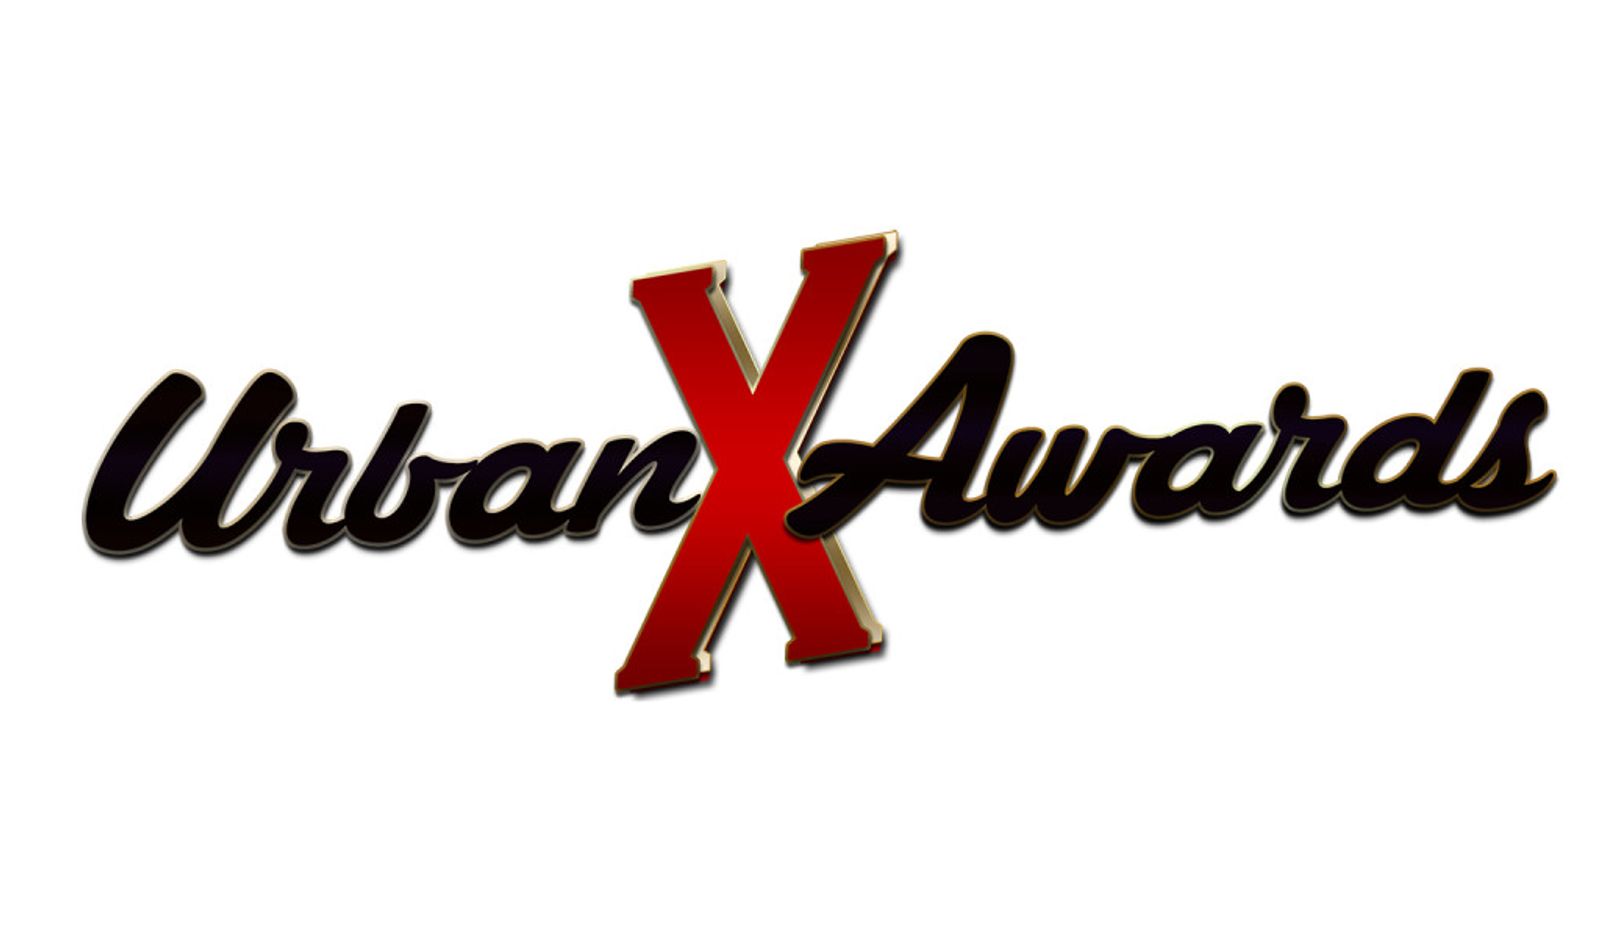 Urban X Awards Return With Message of Inclusion